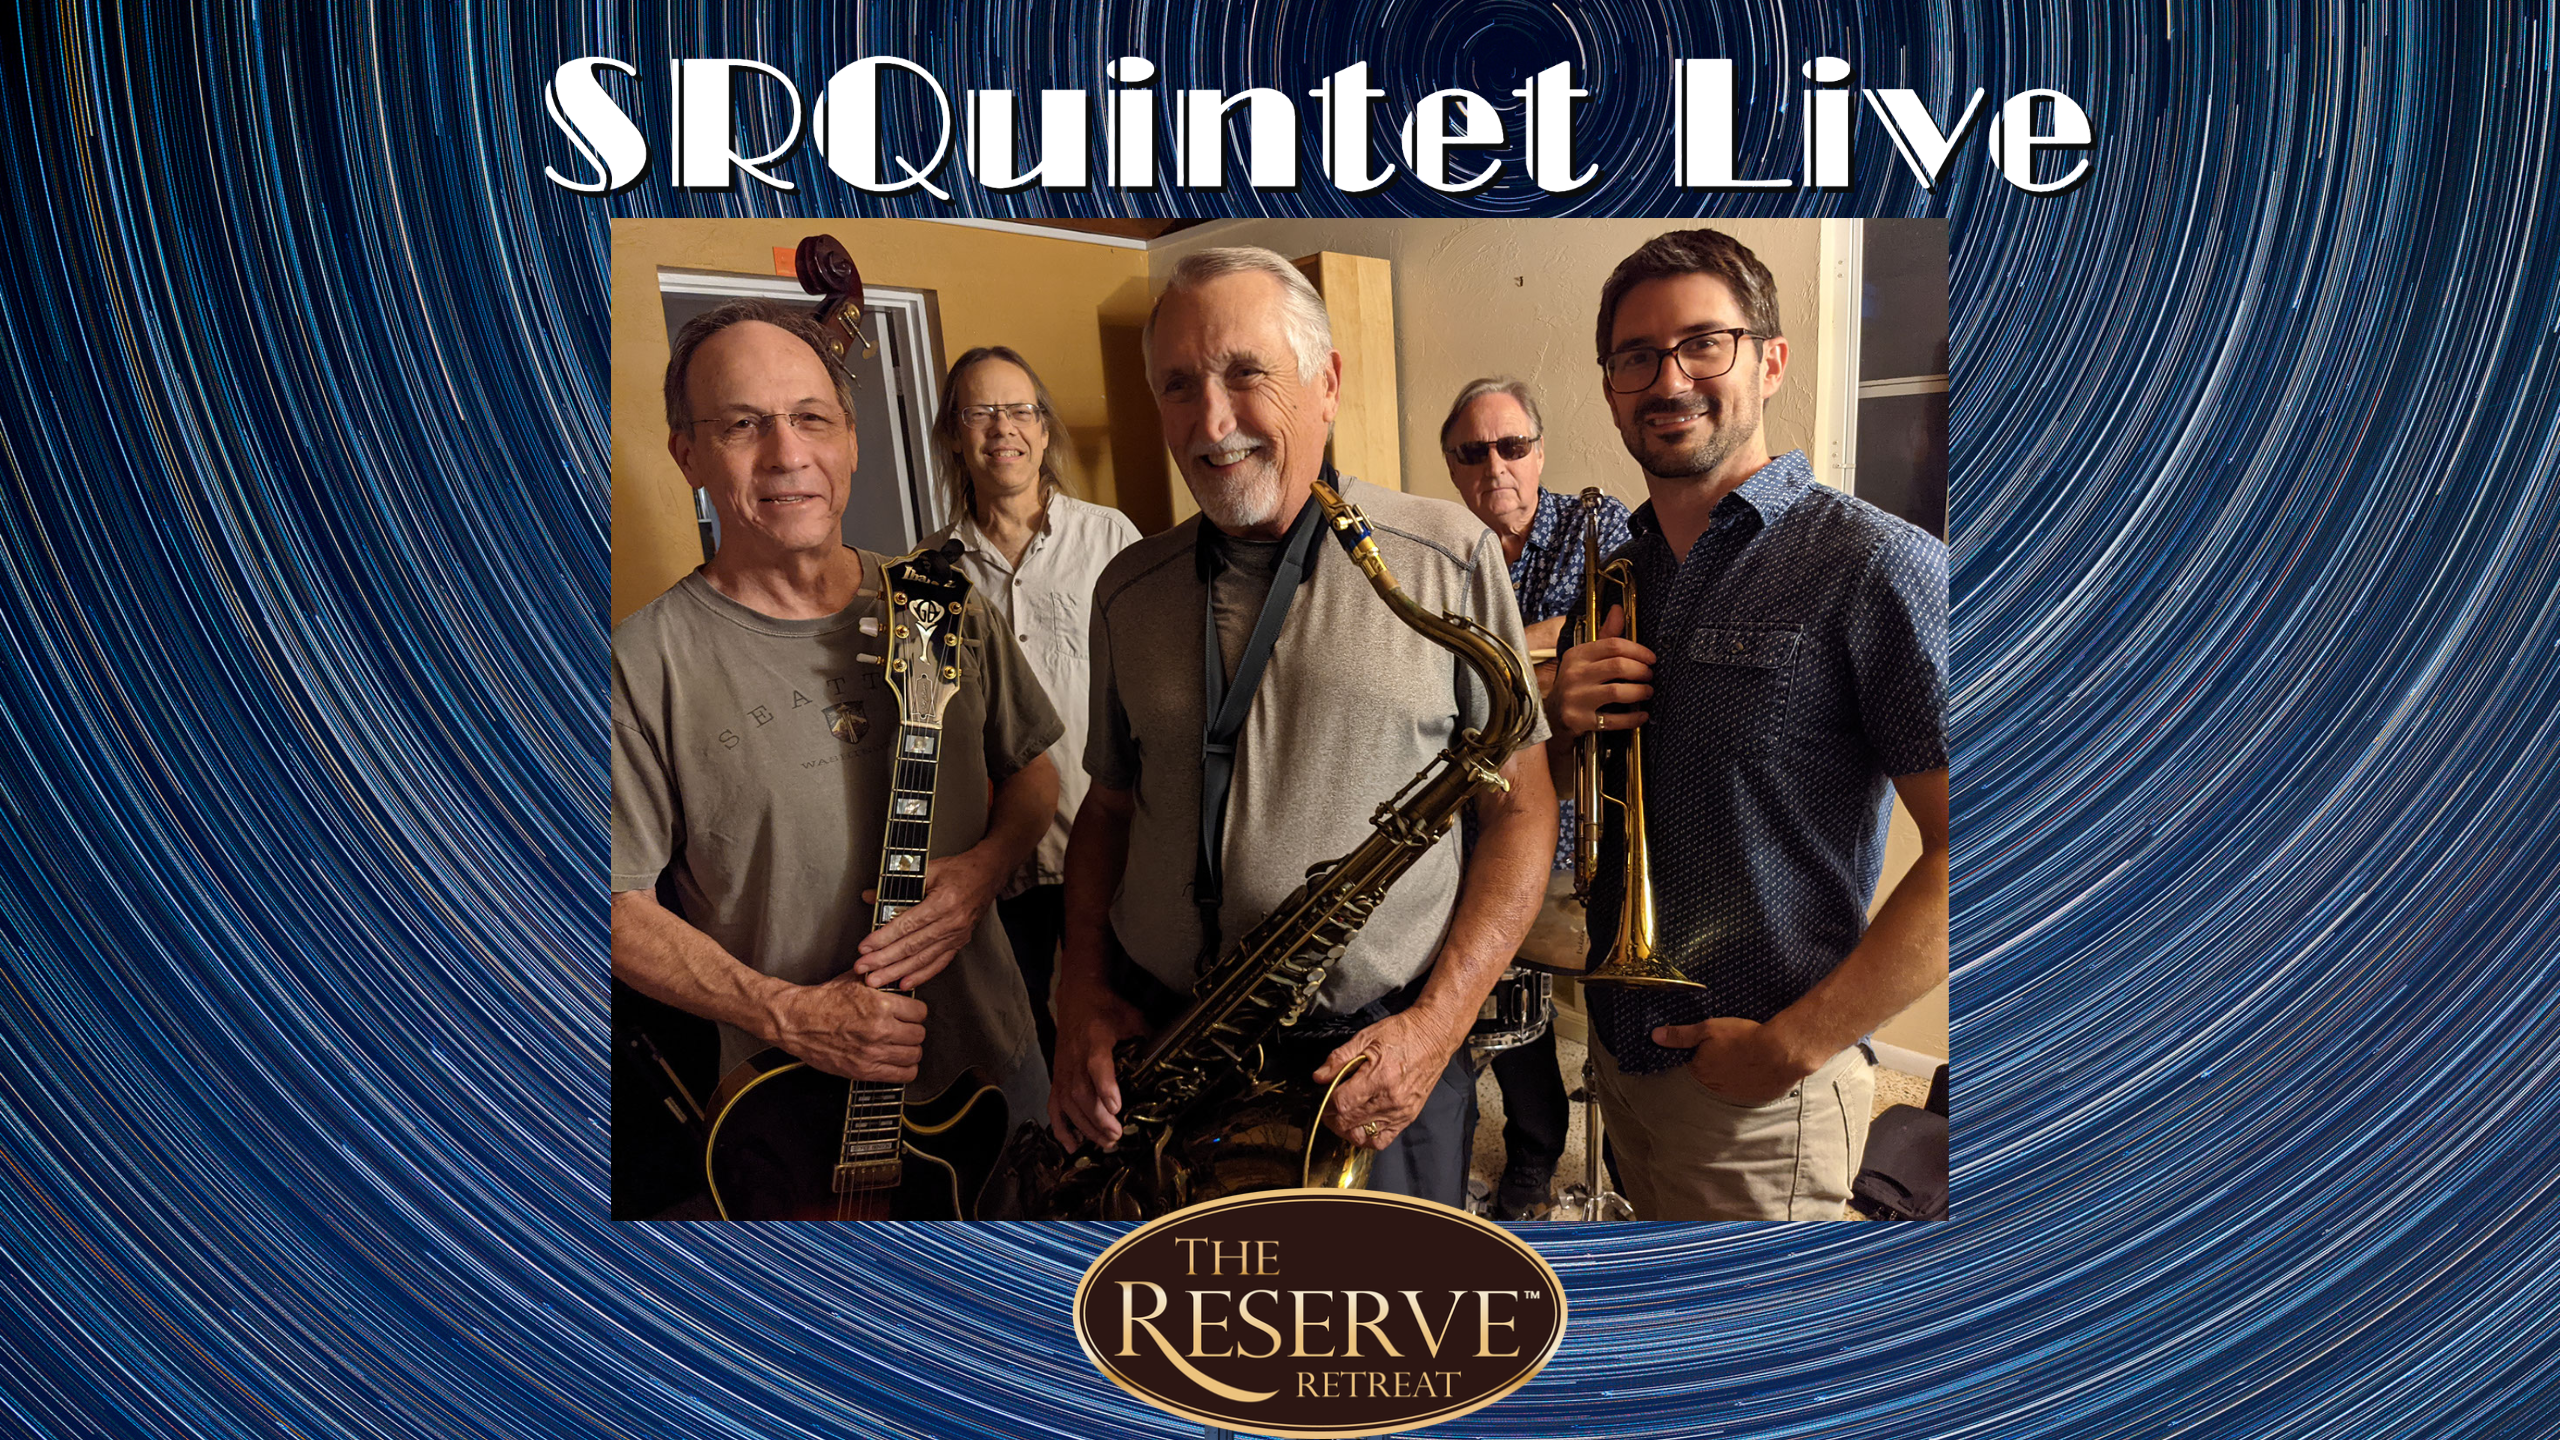 Join us for Jazz Under the Stars with SRQuintet at The Reserve Retreat in Sarasota